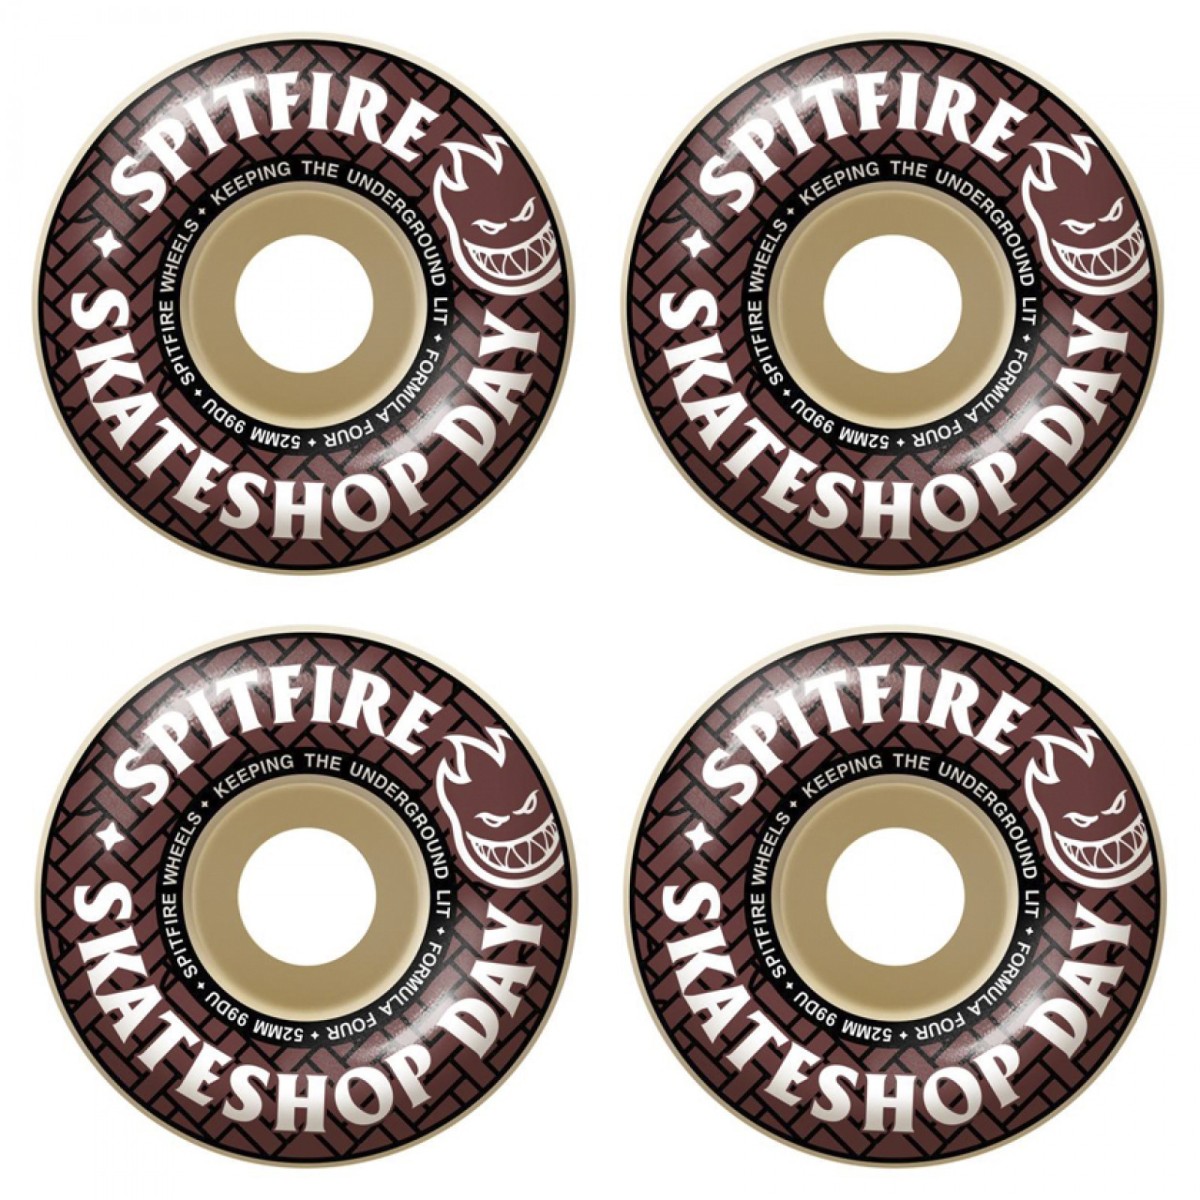 Verlenen Familielid solidariteit Spitfire Formula Four Skate Shop Day Wheels 99a hardness rating suitable  for all street and ramp skating. Spitfire's Classic shape. Spitfire high  quality poured 100% urethane. - Penloe